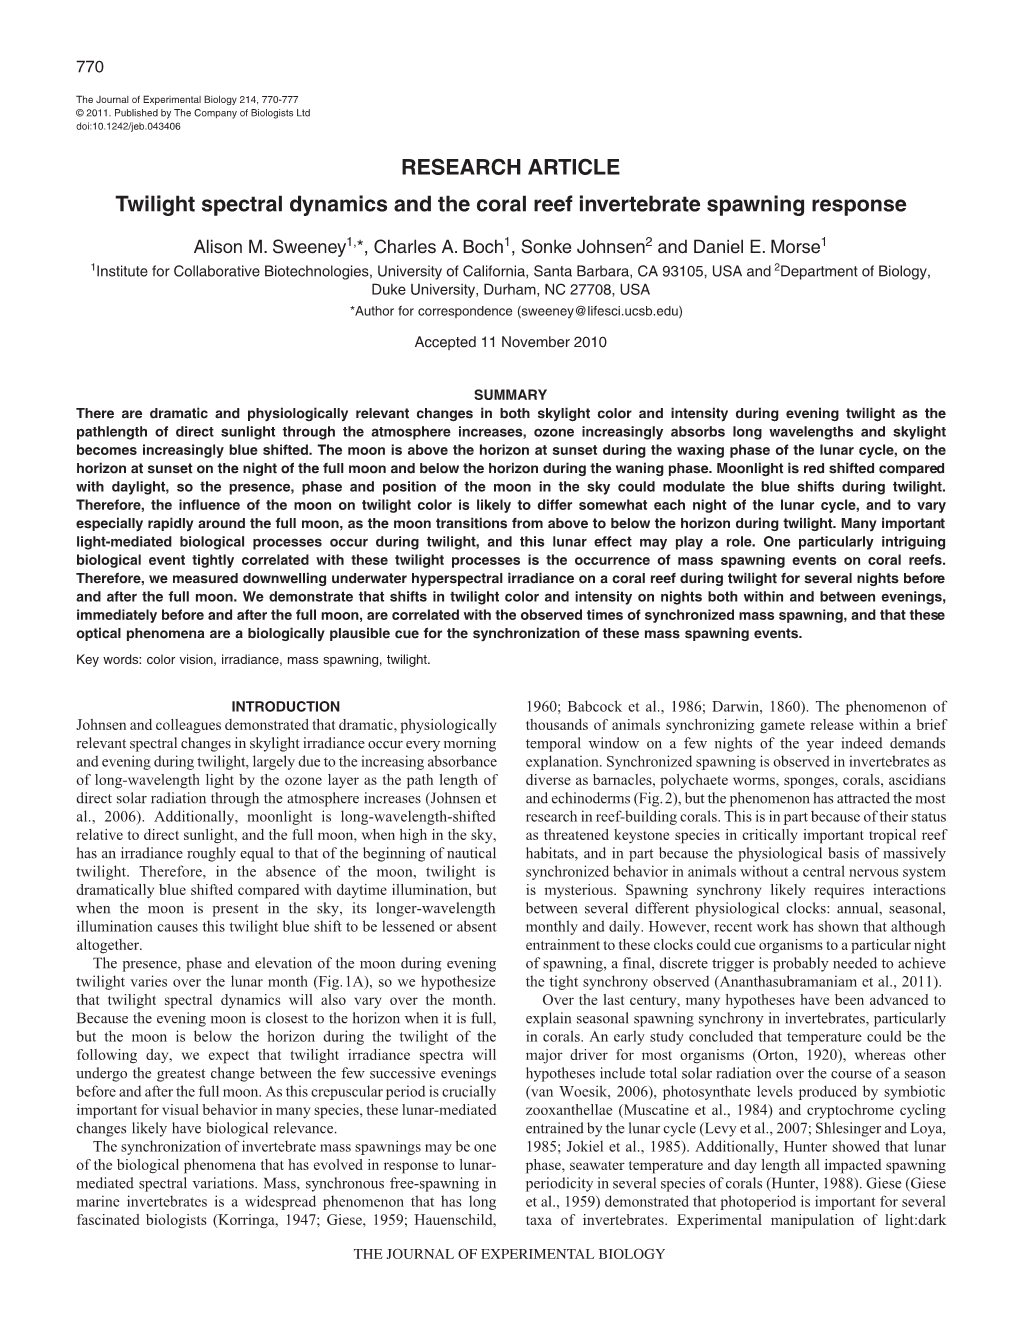 RESEARCH ARTICLE Twilight Spectral Dynamics and the Coral Reef Invertebrate Spawning Response